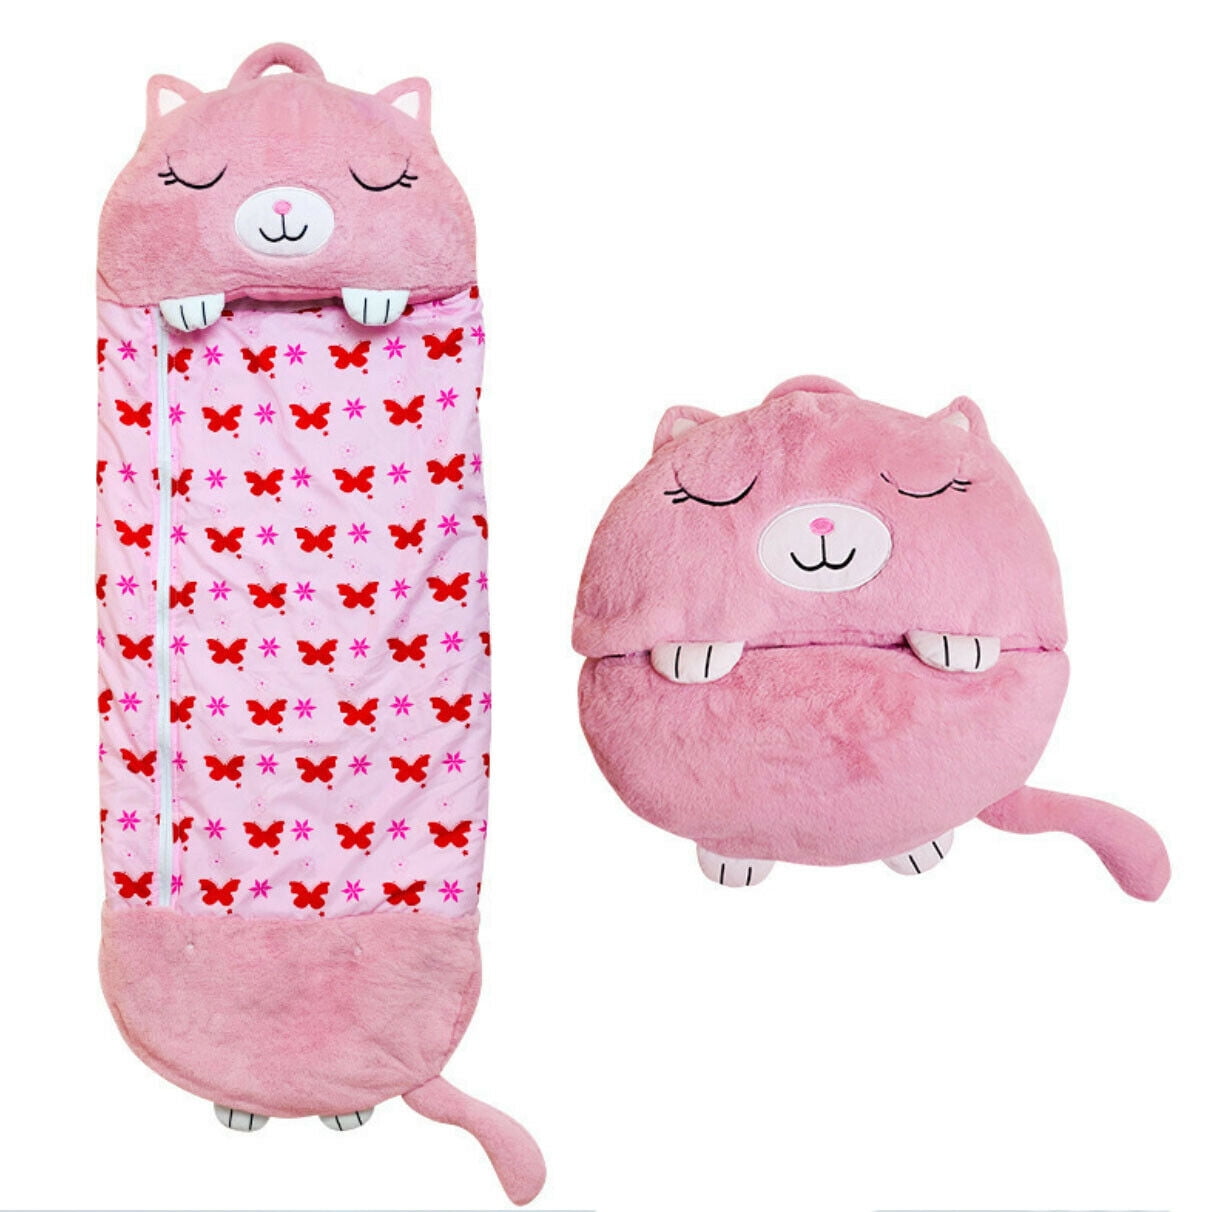 180cm Happy Nappers Sleeping Bag Kids Play Pillow Soft Warm Unicorn Gift Toys 